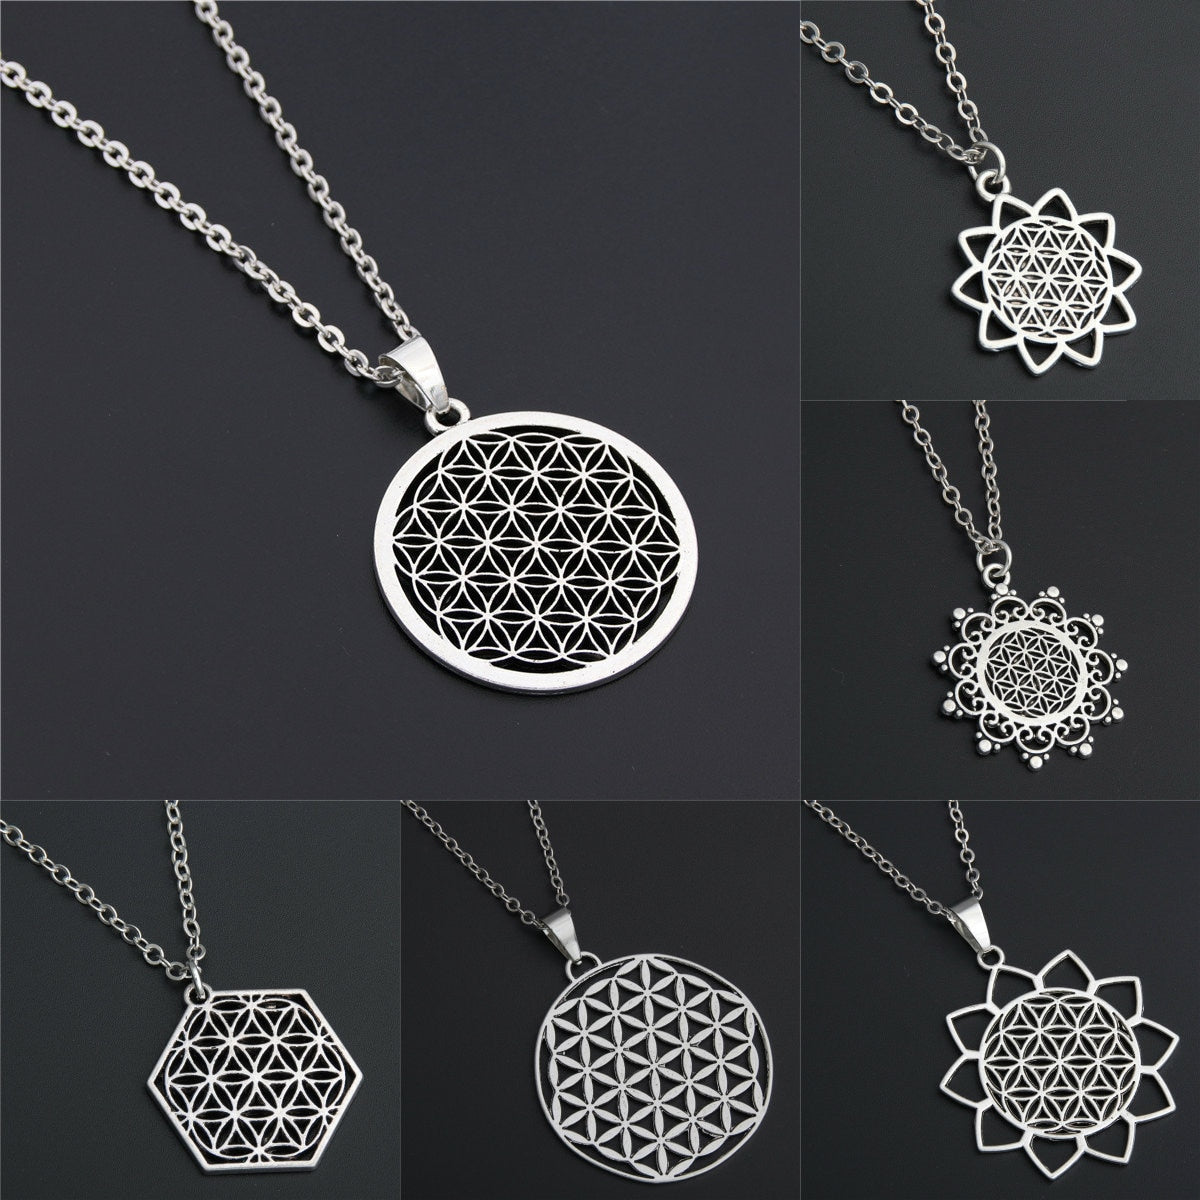 Seed Of Life Pendant Flower Of Life Sacred Geometry Necklace